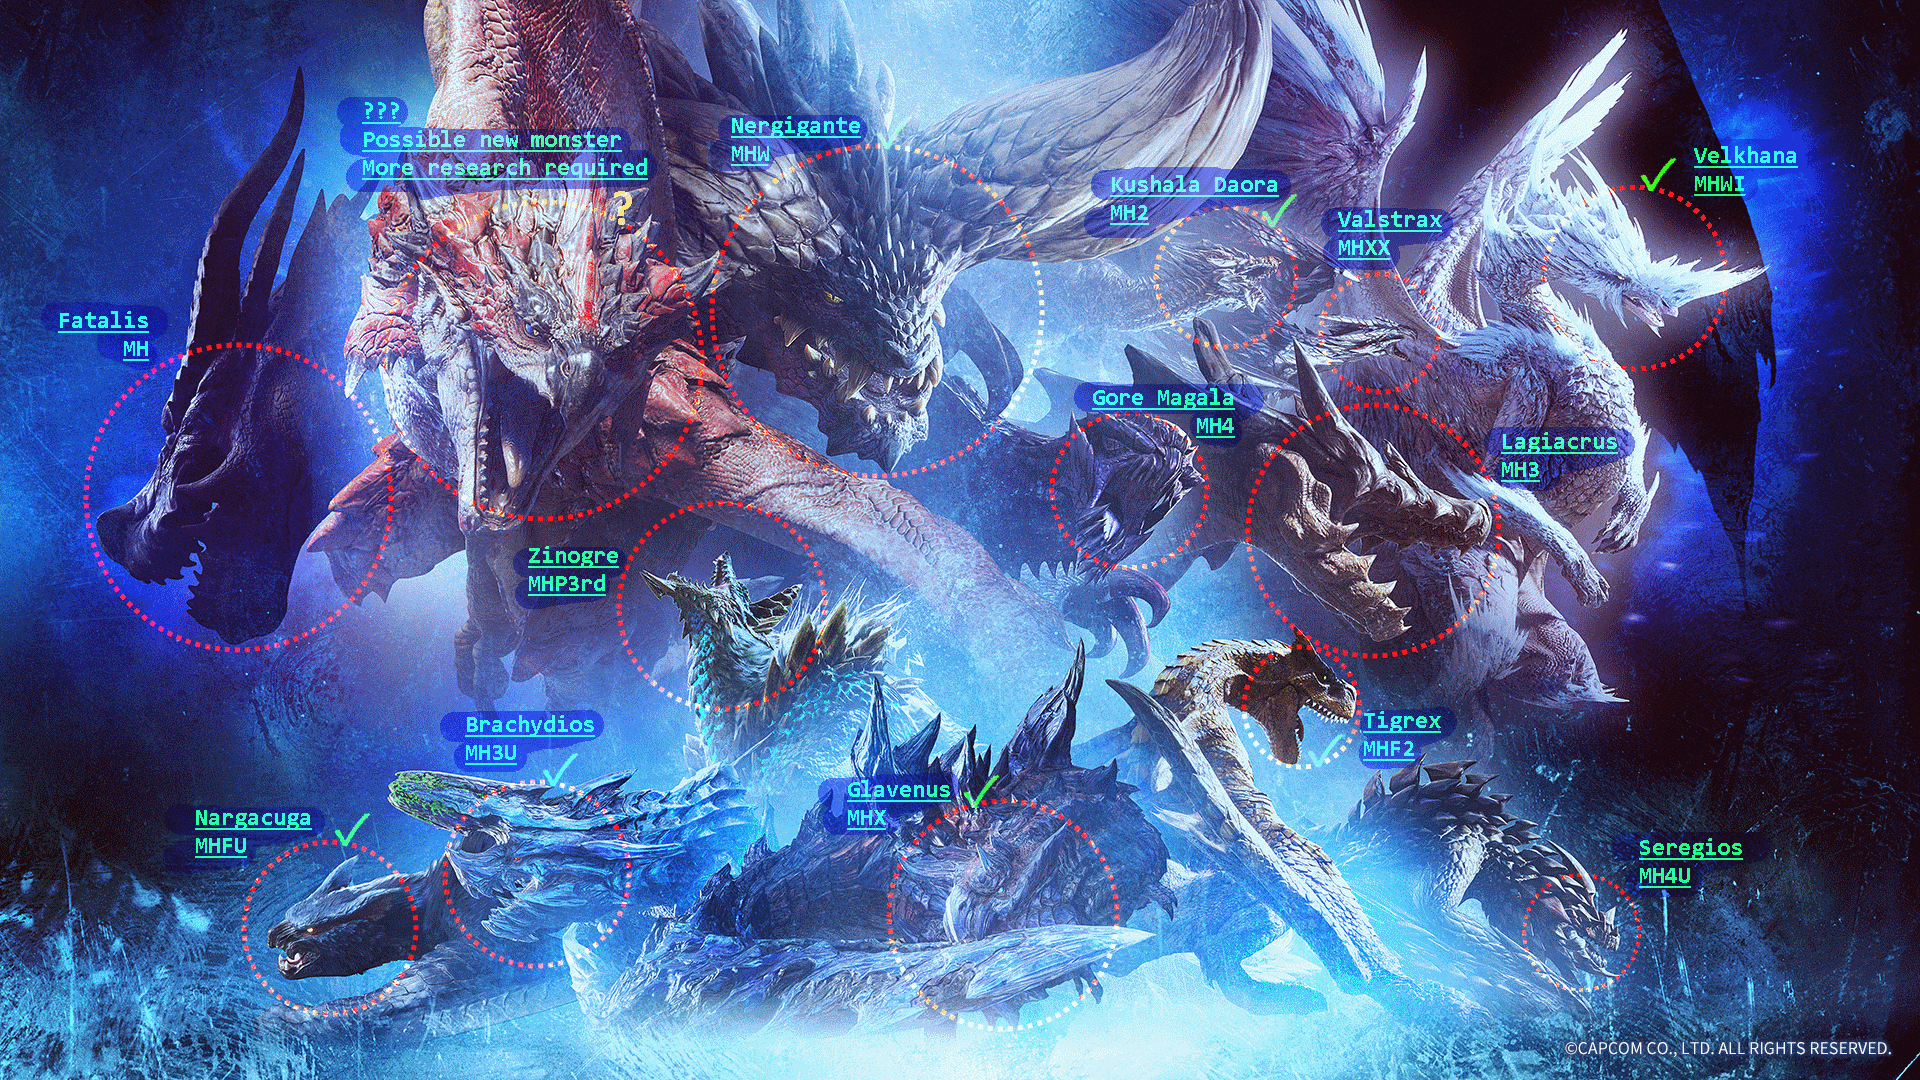 In Case You Need Help With The Poster Monsterhunter